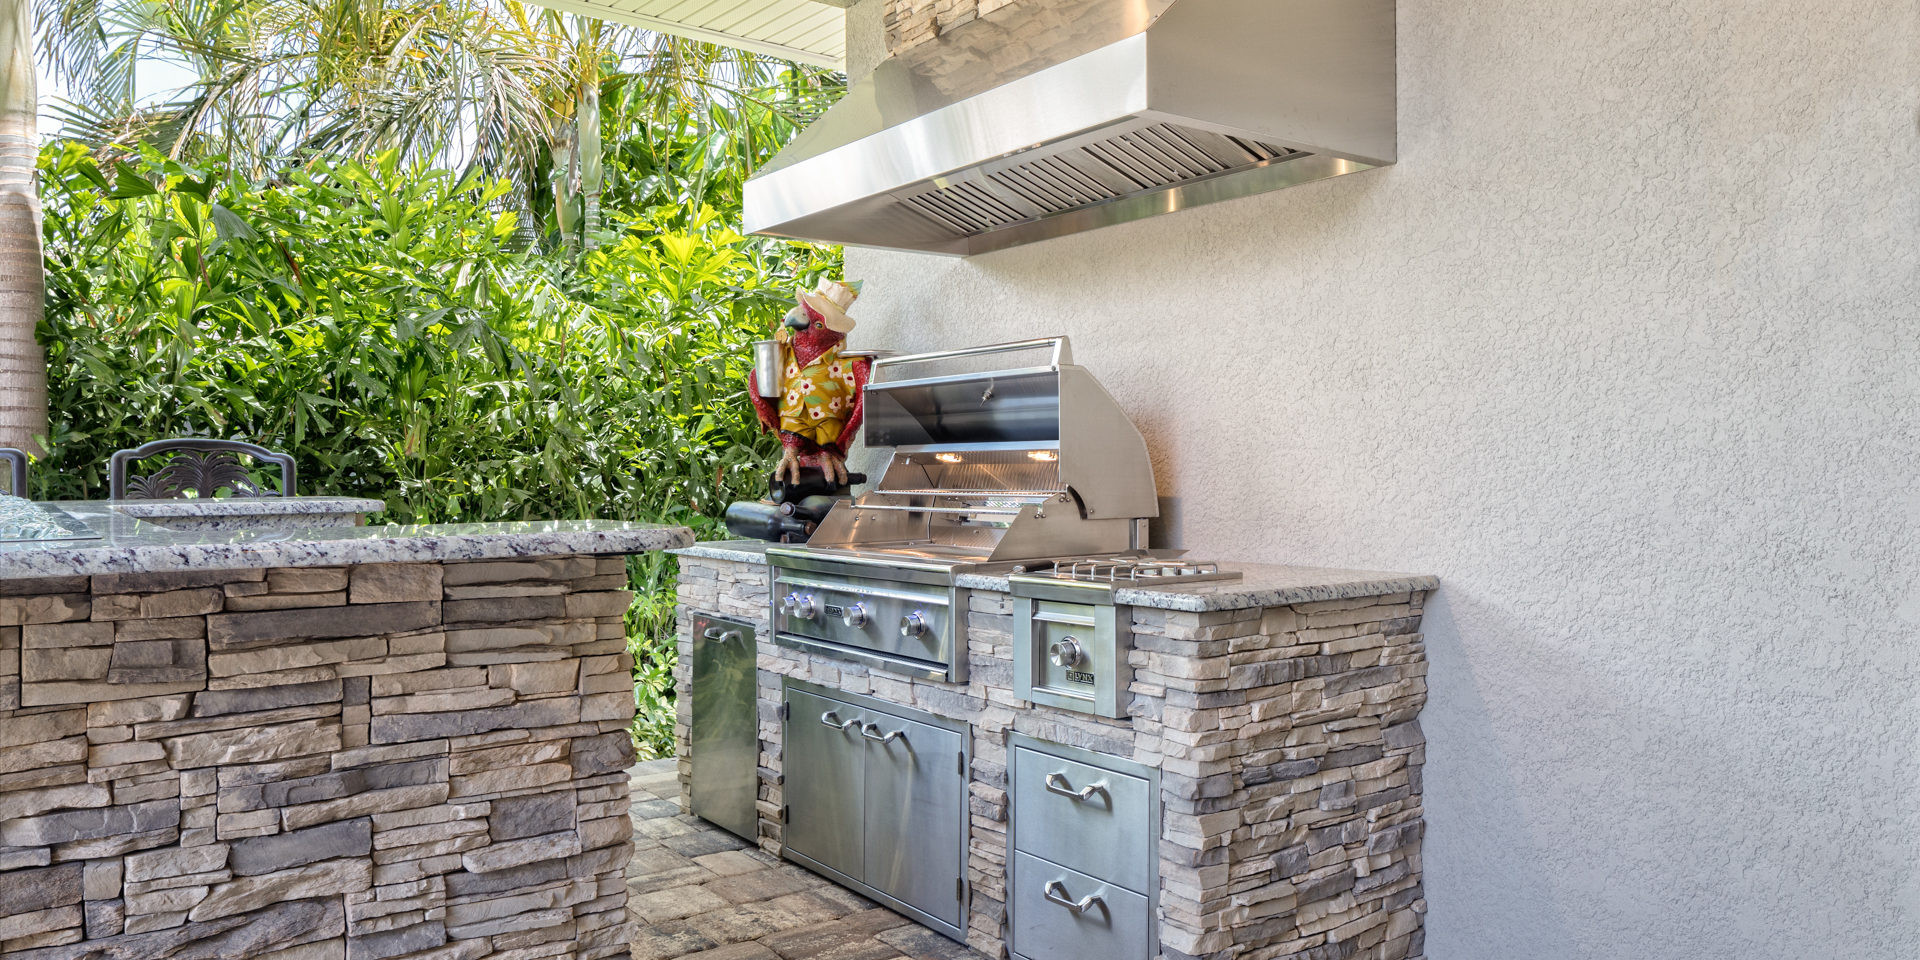 Stainless Steel Outdoor Kitchen Cabinets
 Benefits of Stainless Steel Outdoor Kitchen Cabinets All